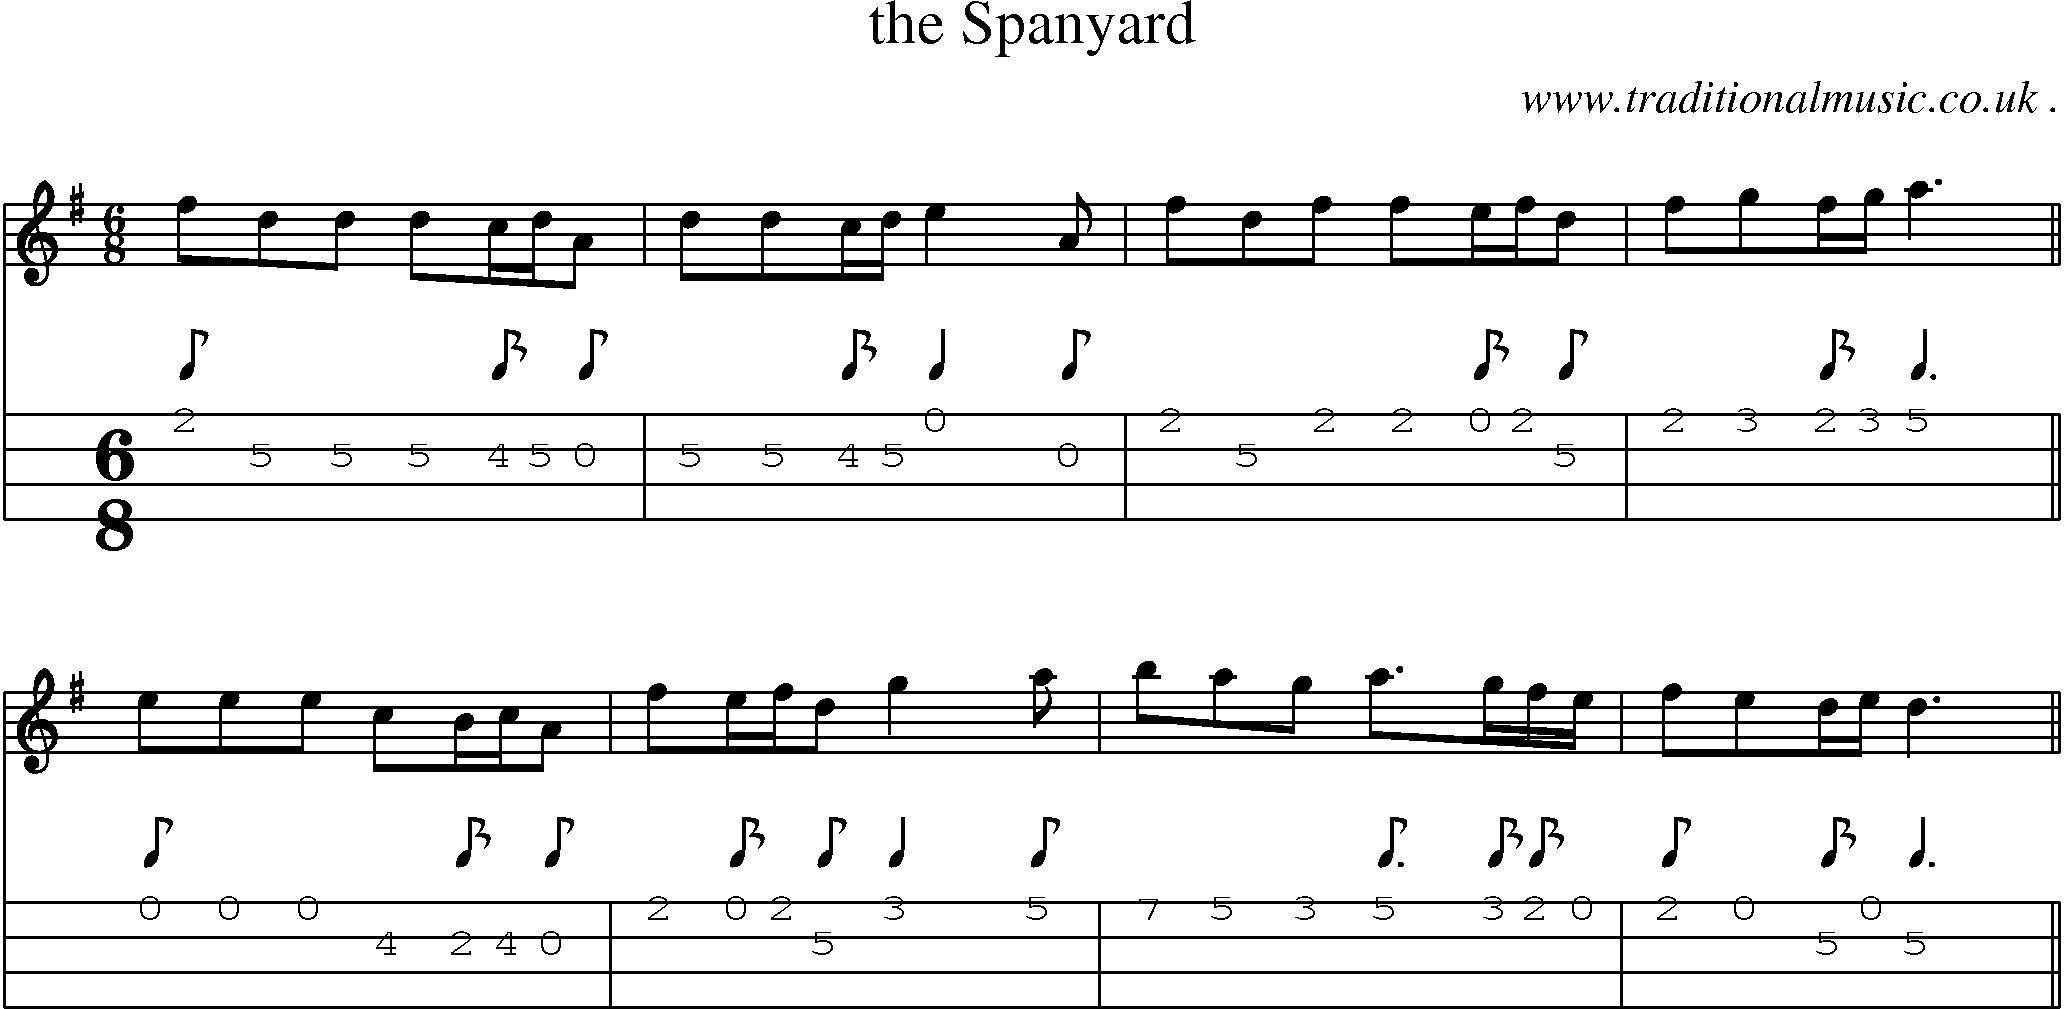 Sheet-music  score, Chords and Mandolin Tabs for The Spanyard